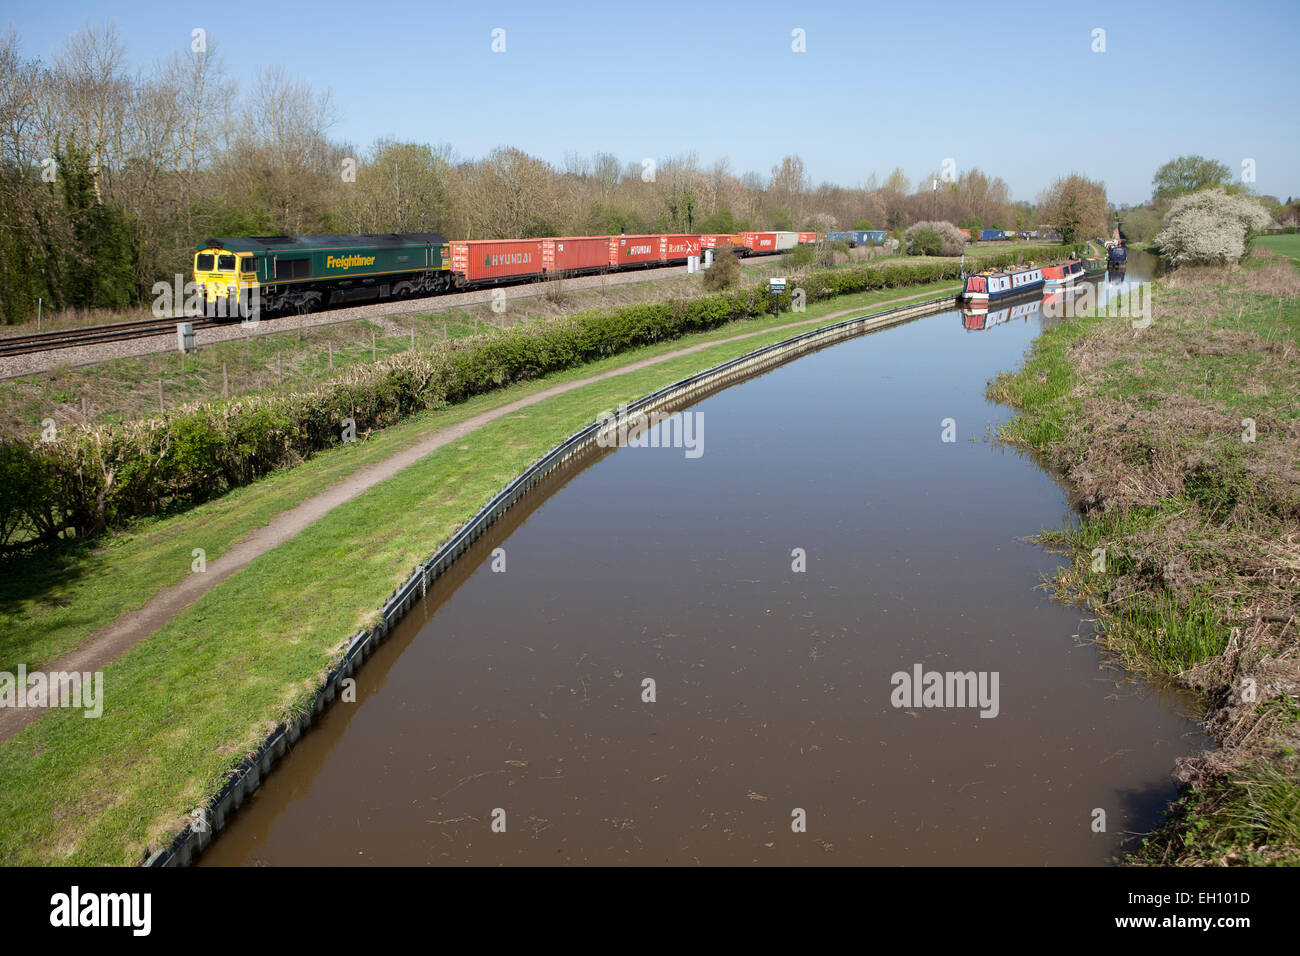 A passenger train runs by the Oxford Canal in Oxfordshire, England Stock Photo